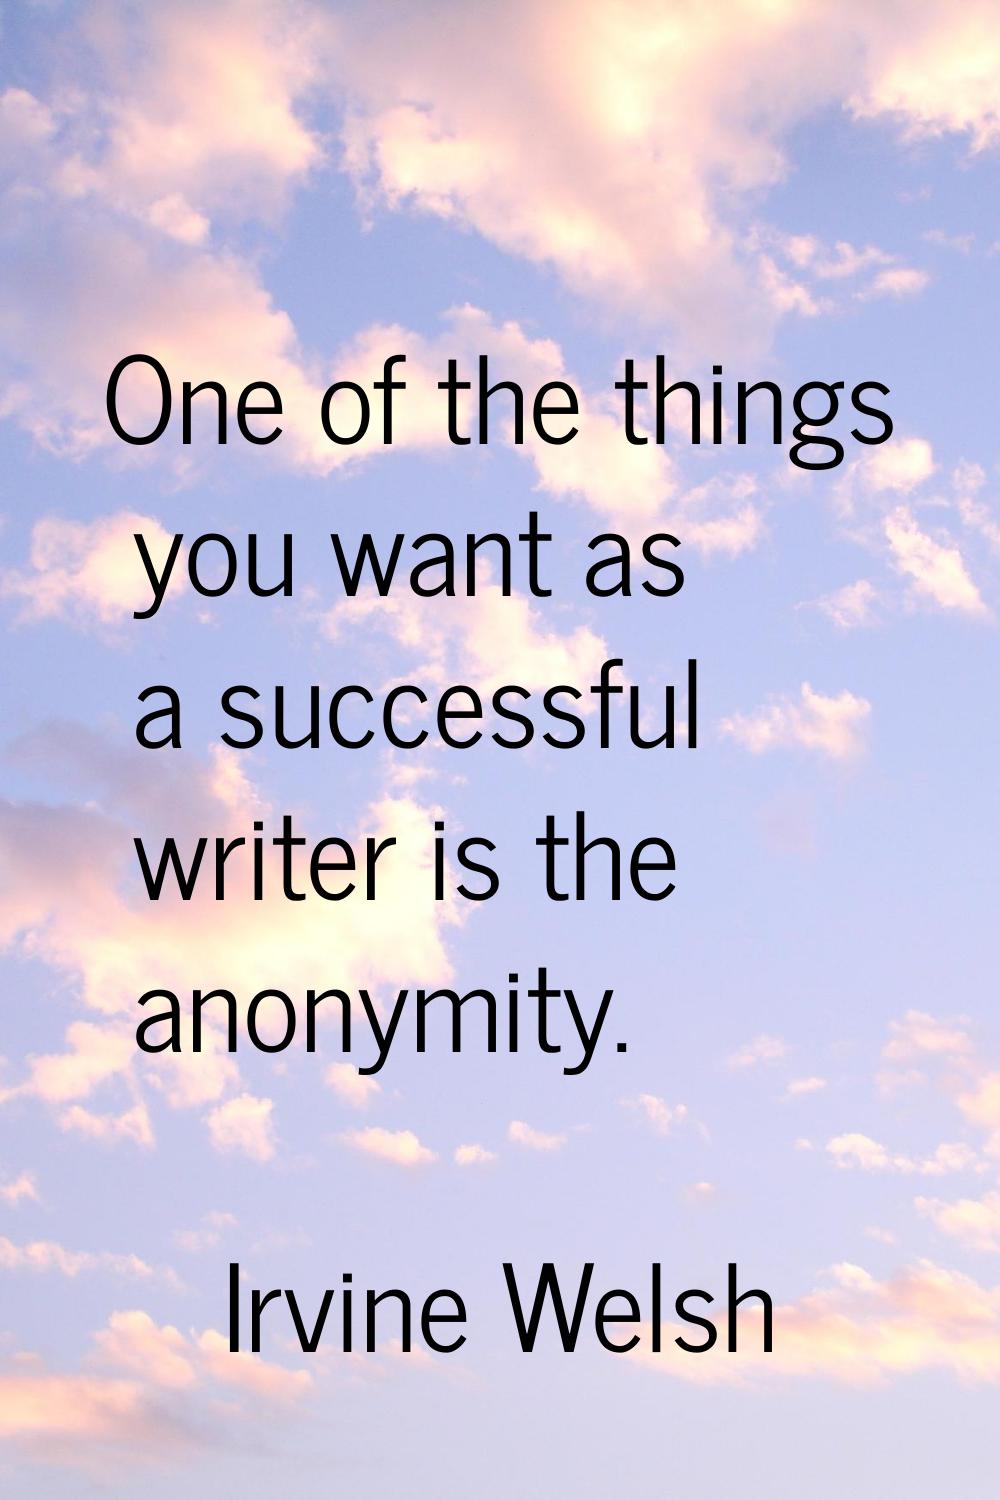 One of the things you want as a successful writer is the anonymity.